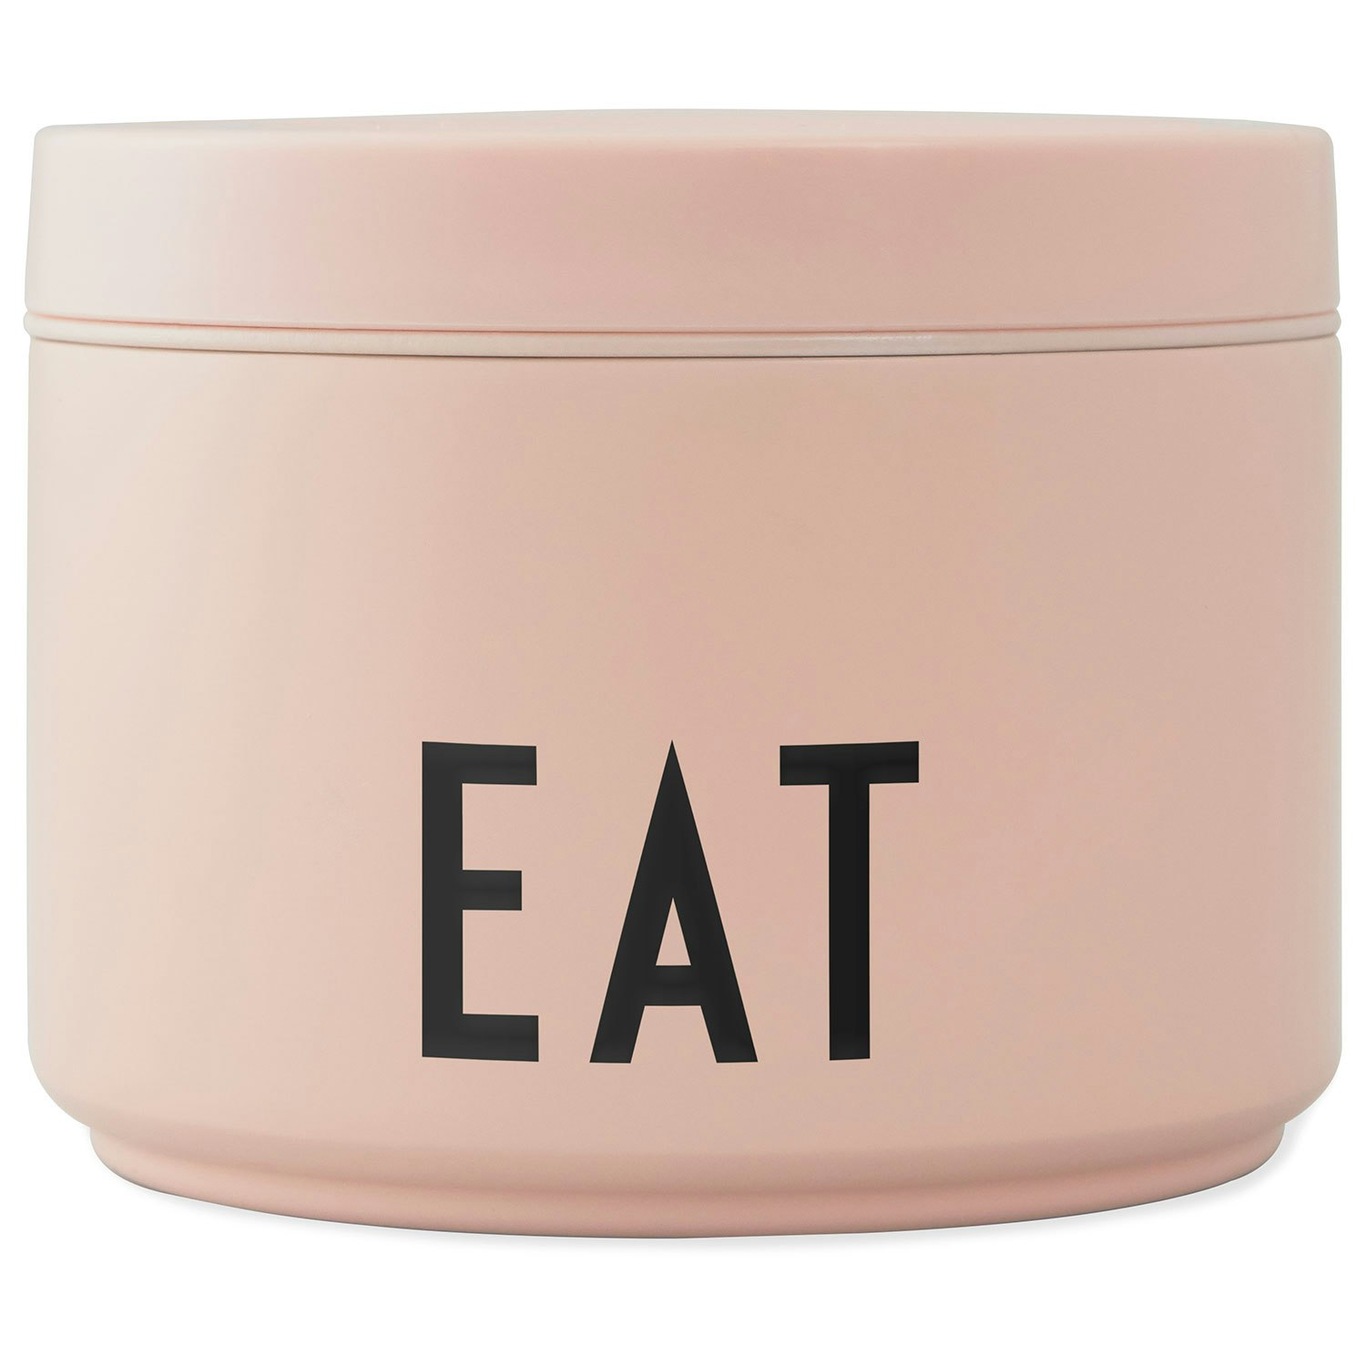 Thermo Lunch Box Small, Nude - Design Letters @ RoyalDesign